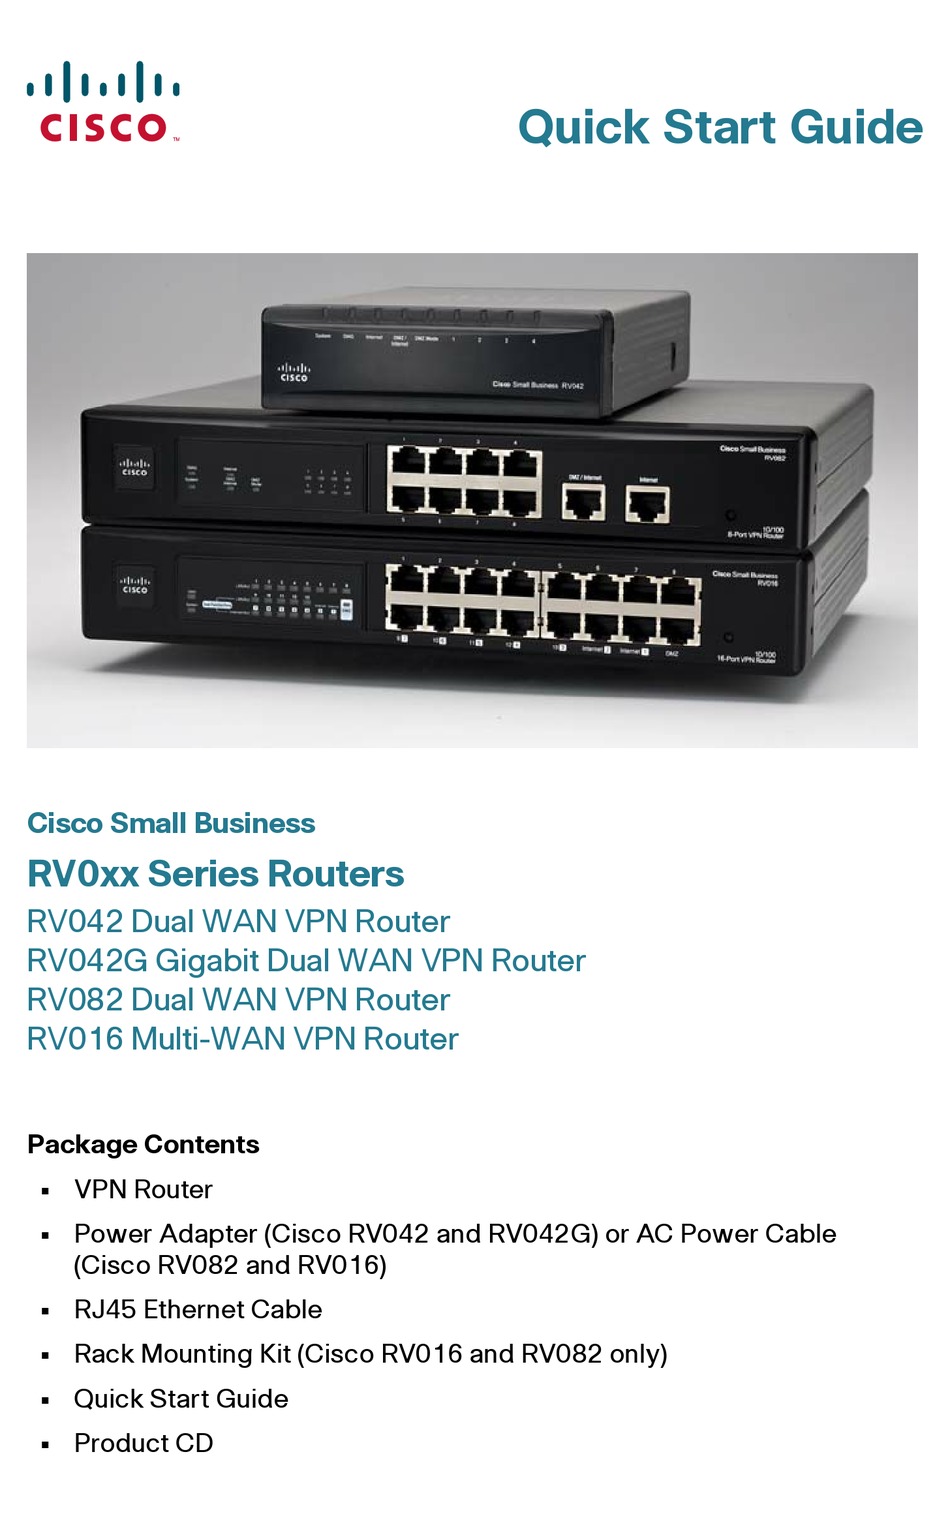 Cisco rv016 16-port 10/100 vpn router manual how to use vpn on android 2.3